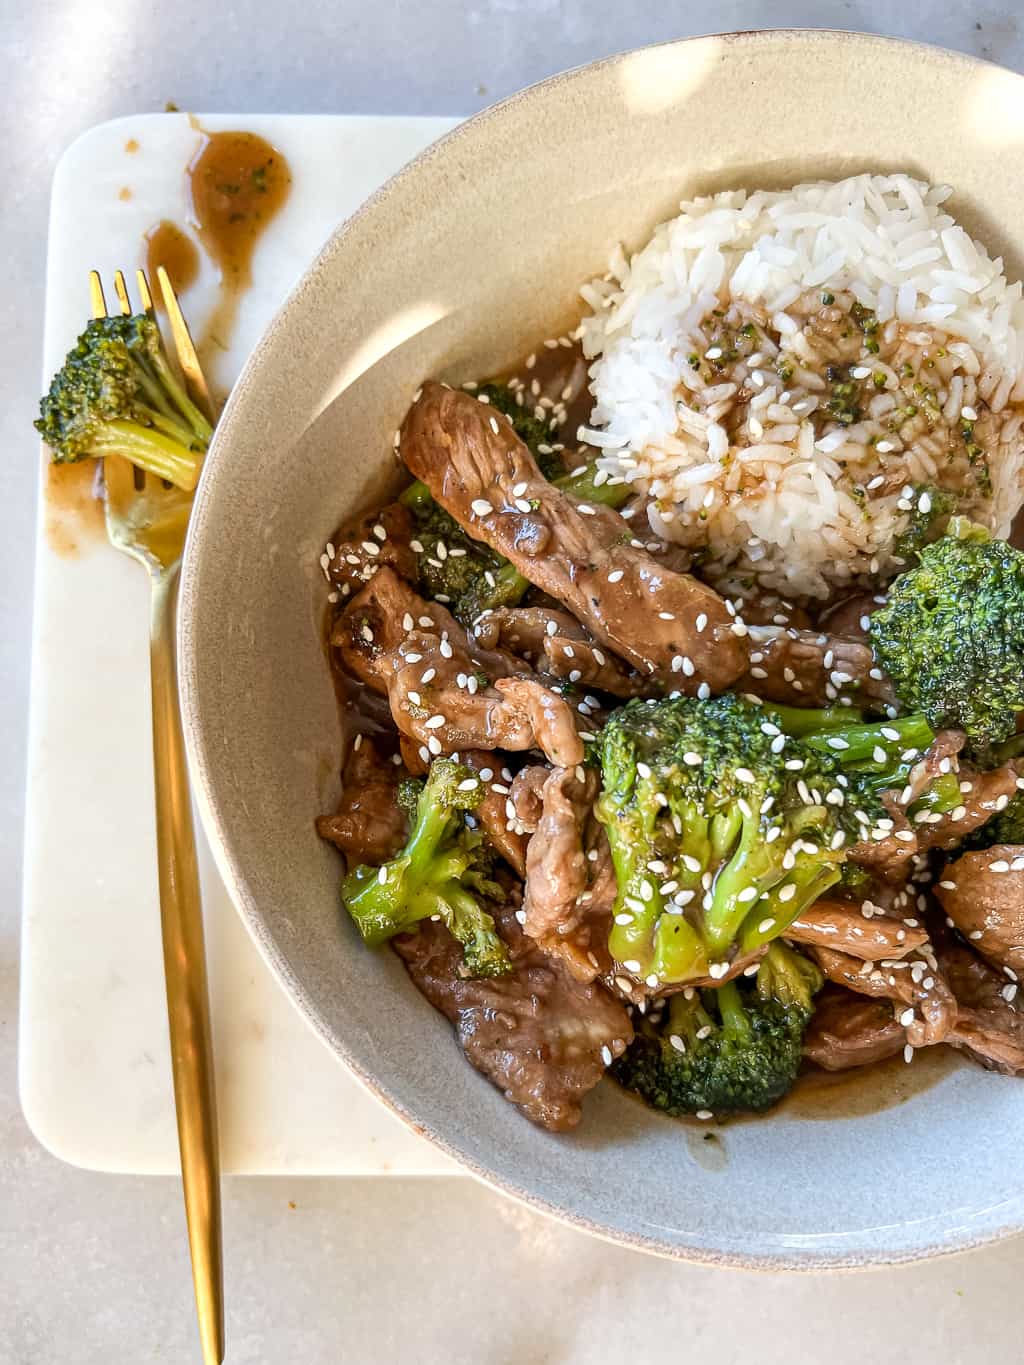 beef and broccoli in a bowl with a side of white rice